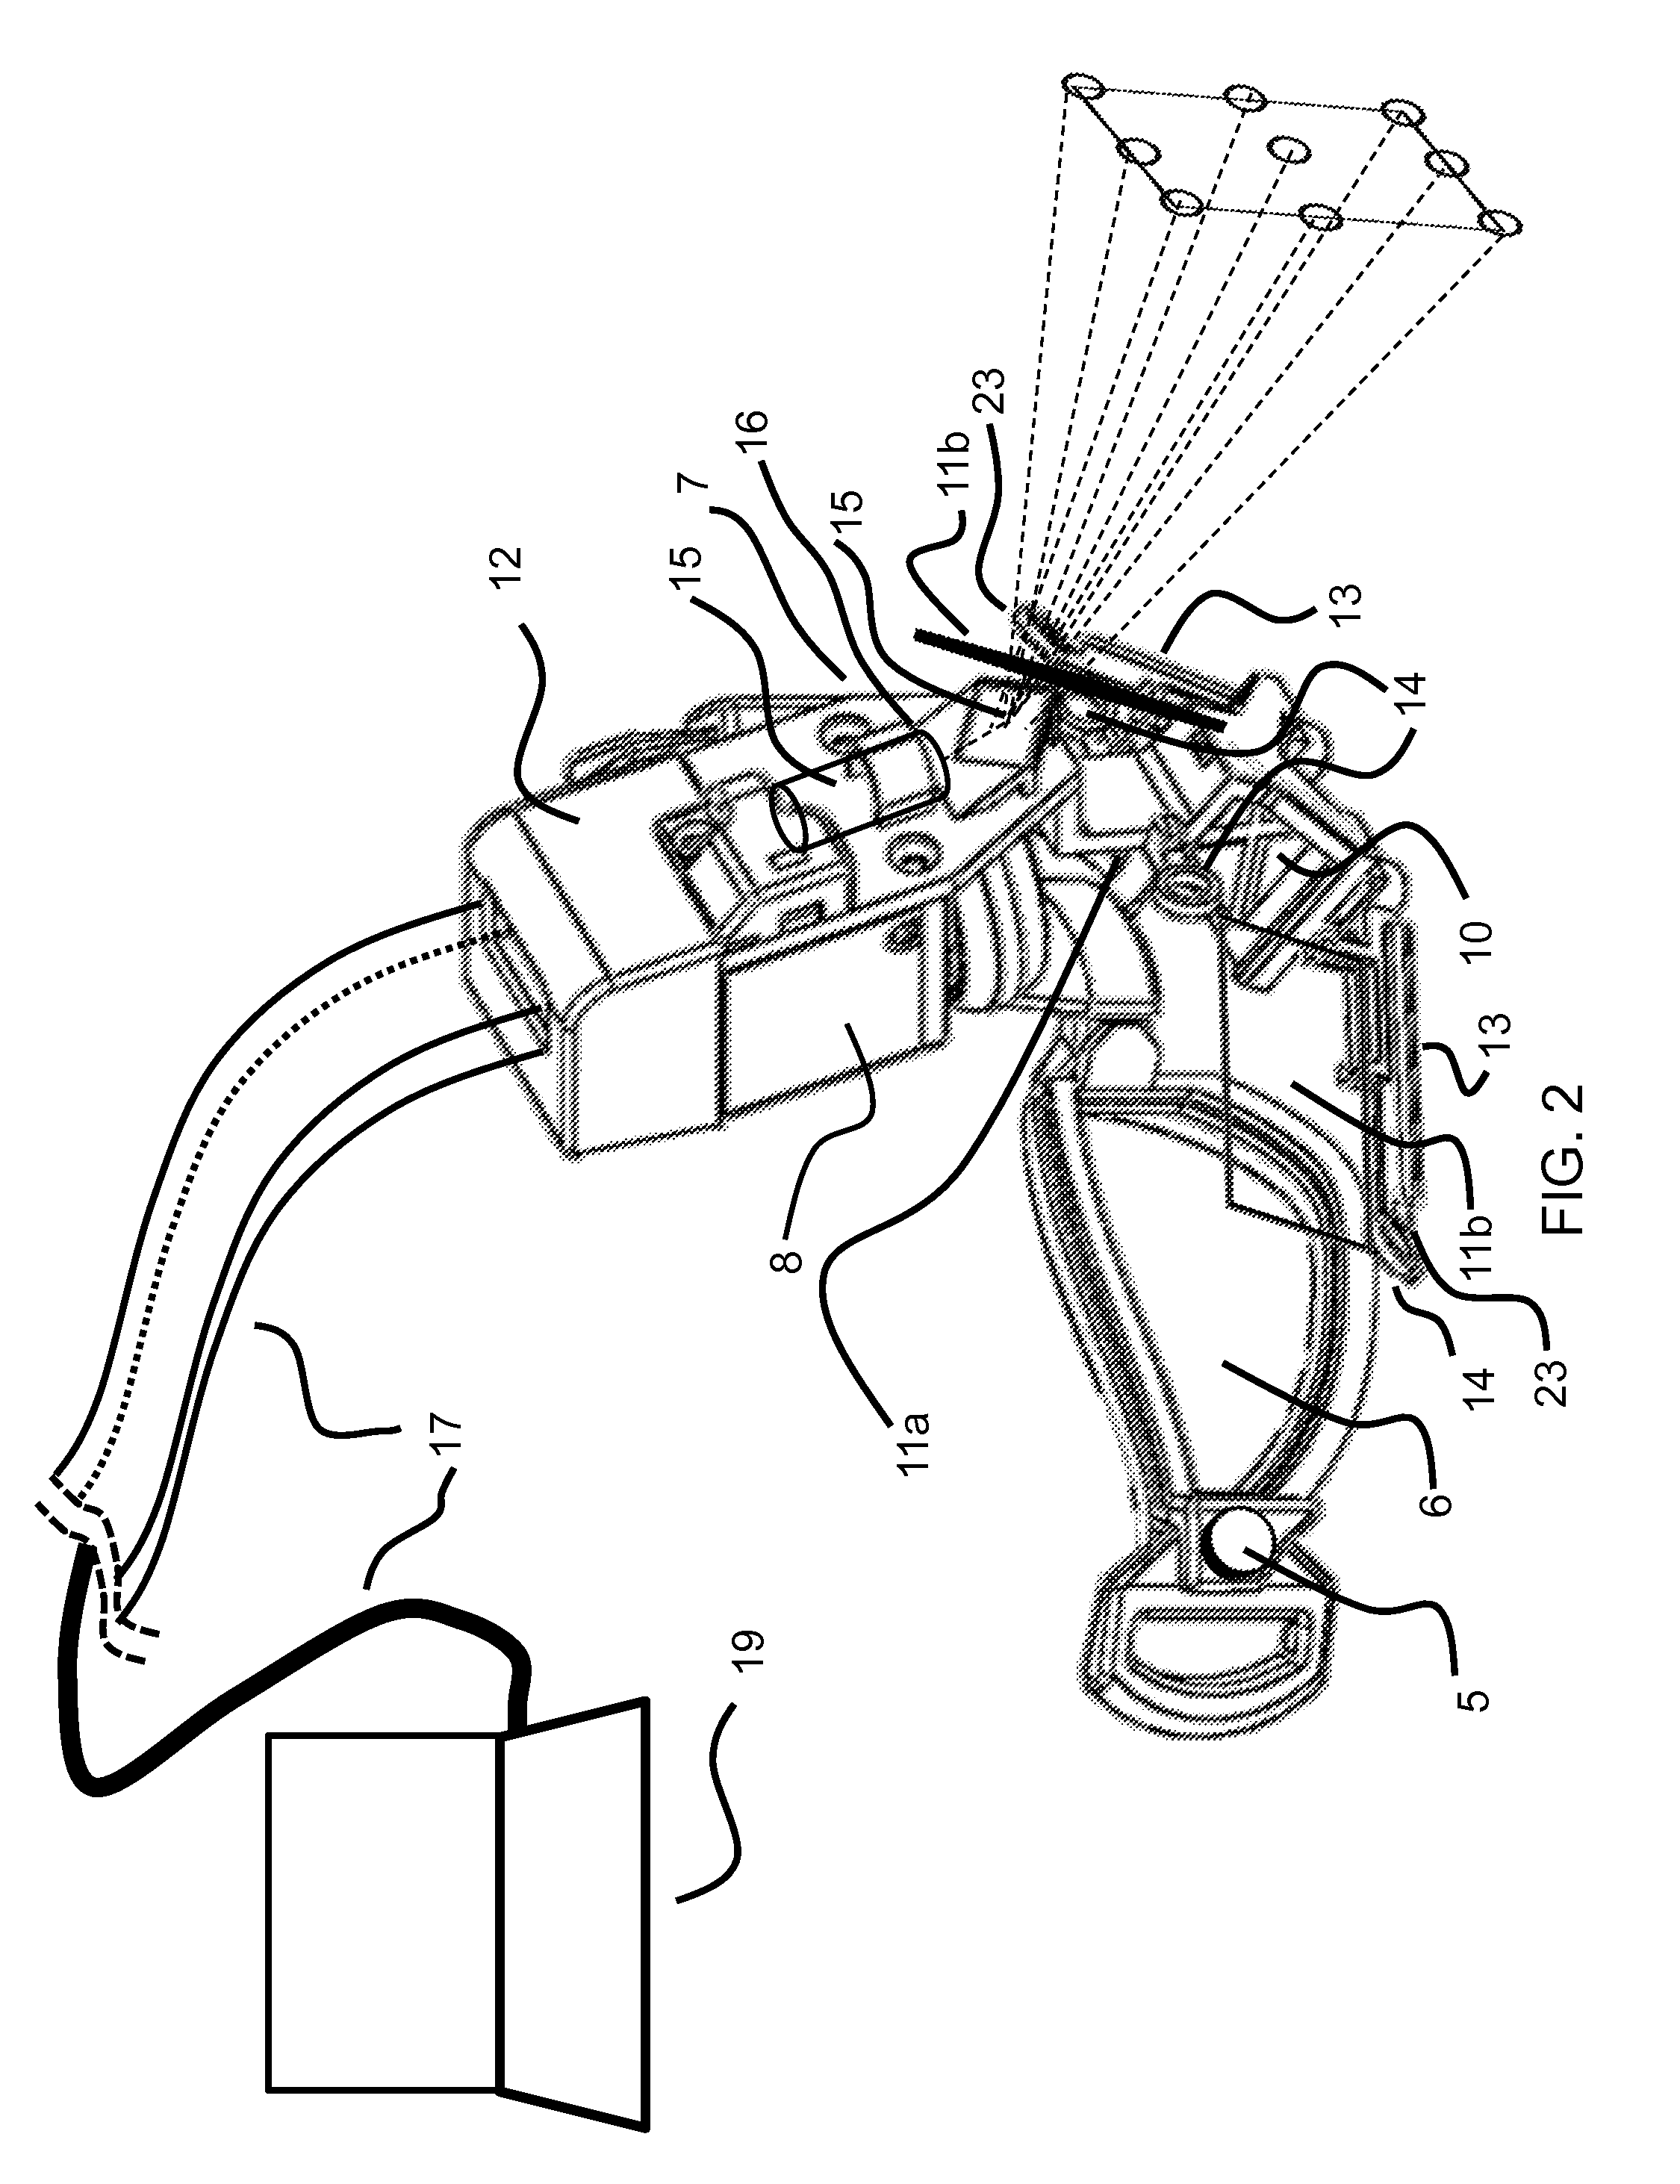 System For Synchronously Sampled Binocular Video-Oculography Using A Single Head-Mounted Camera